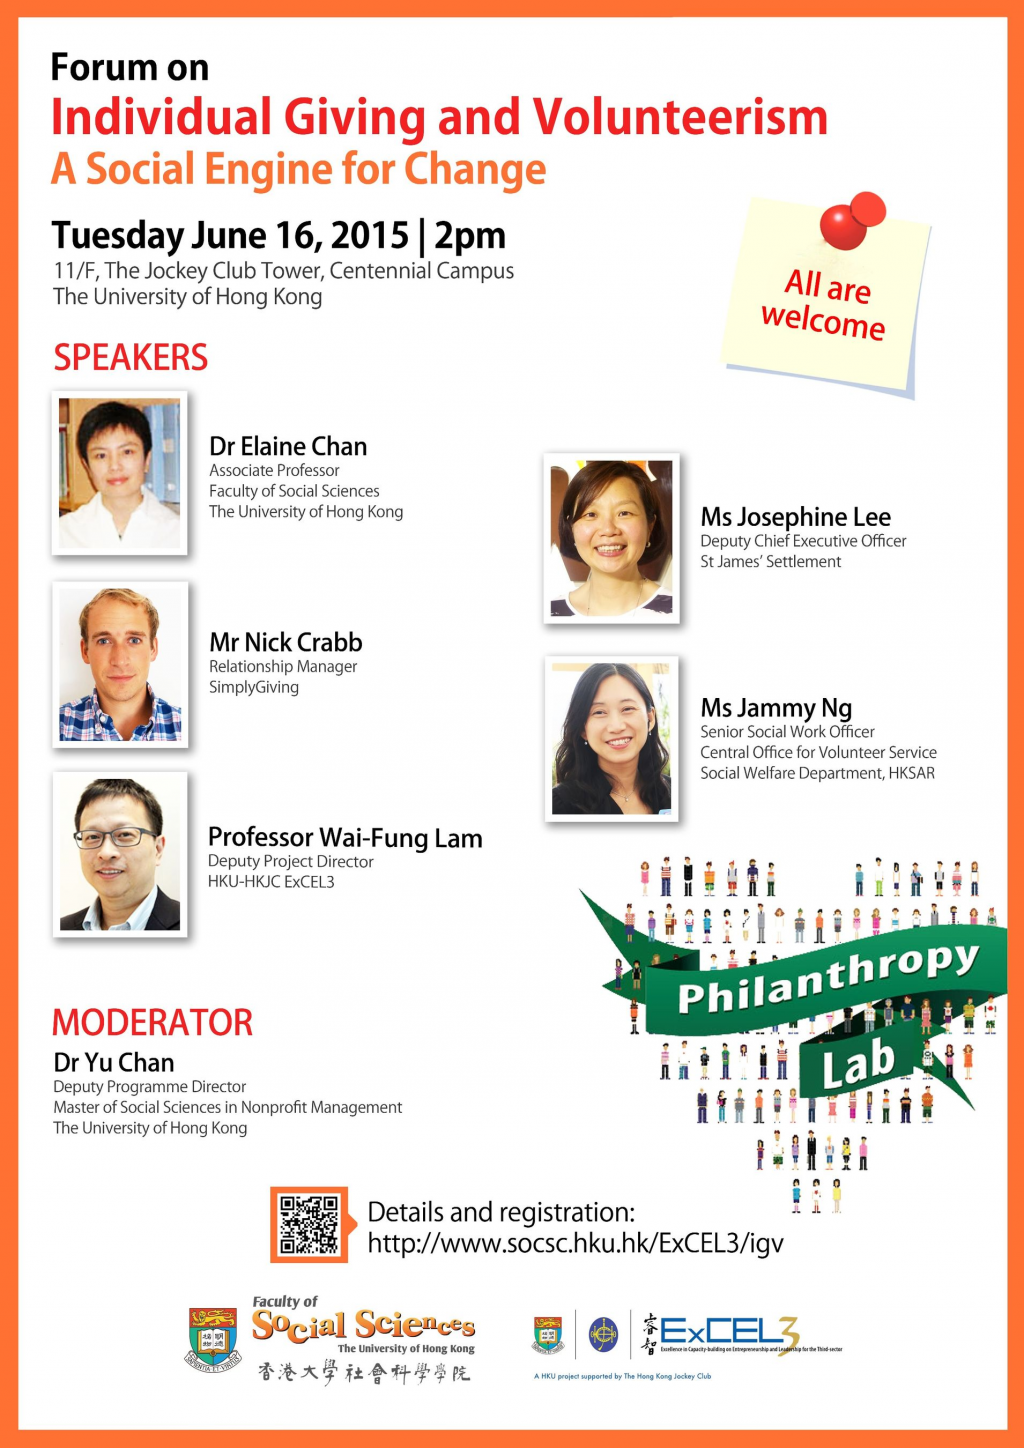 Forum on Individual Giving and Volunteerism